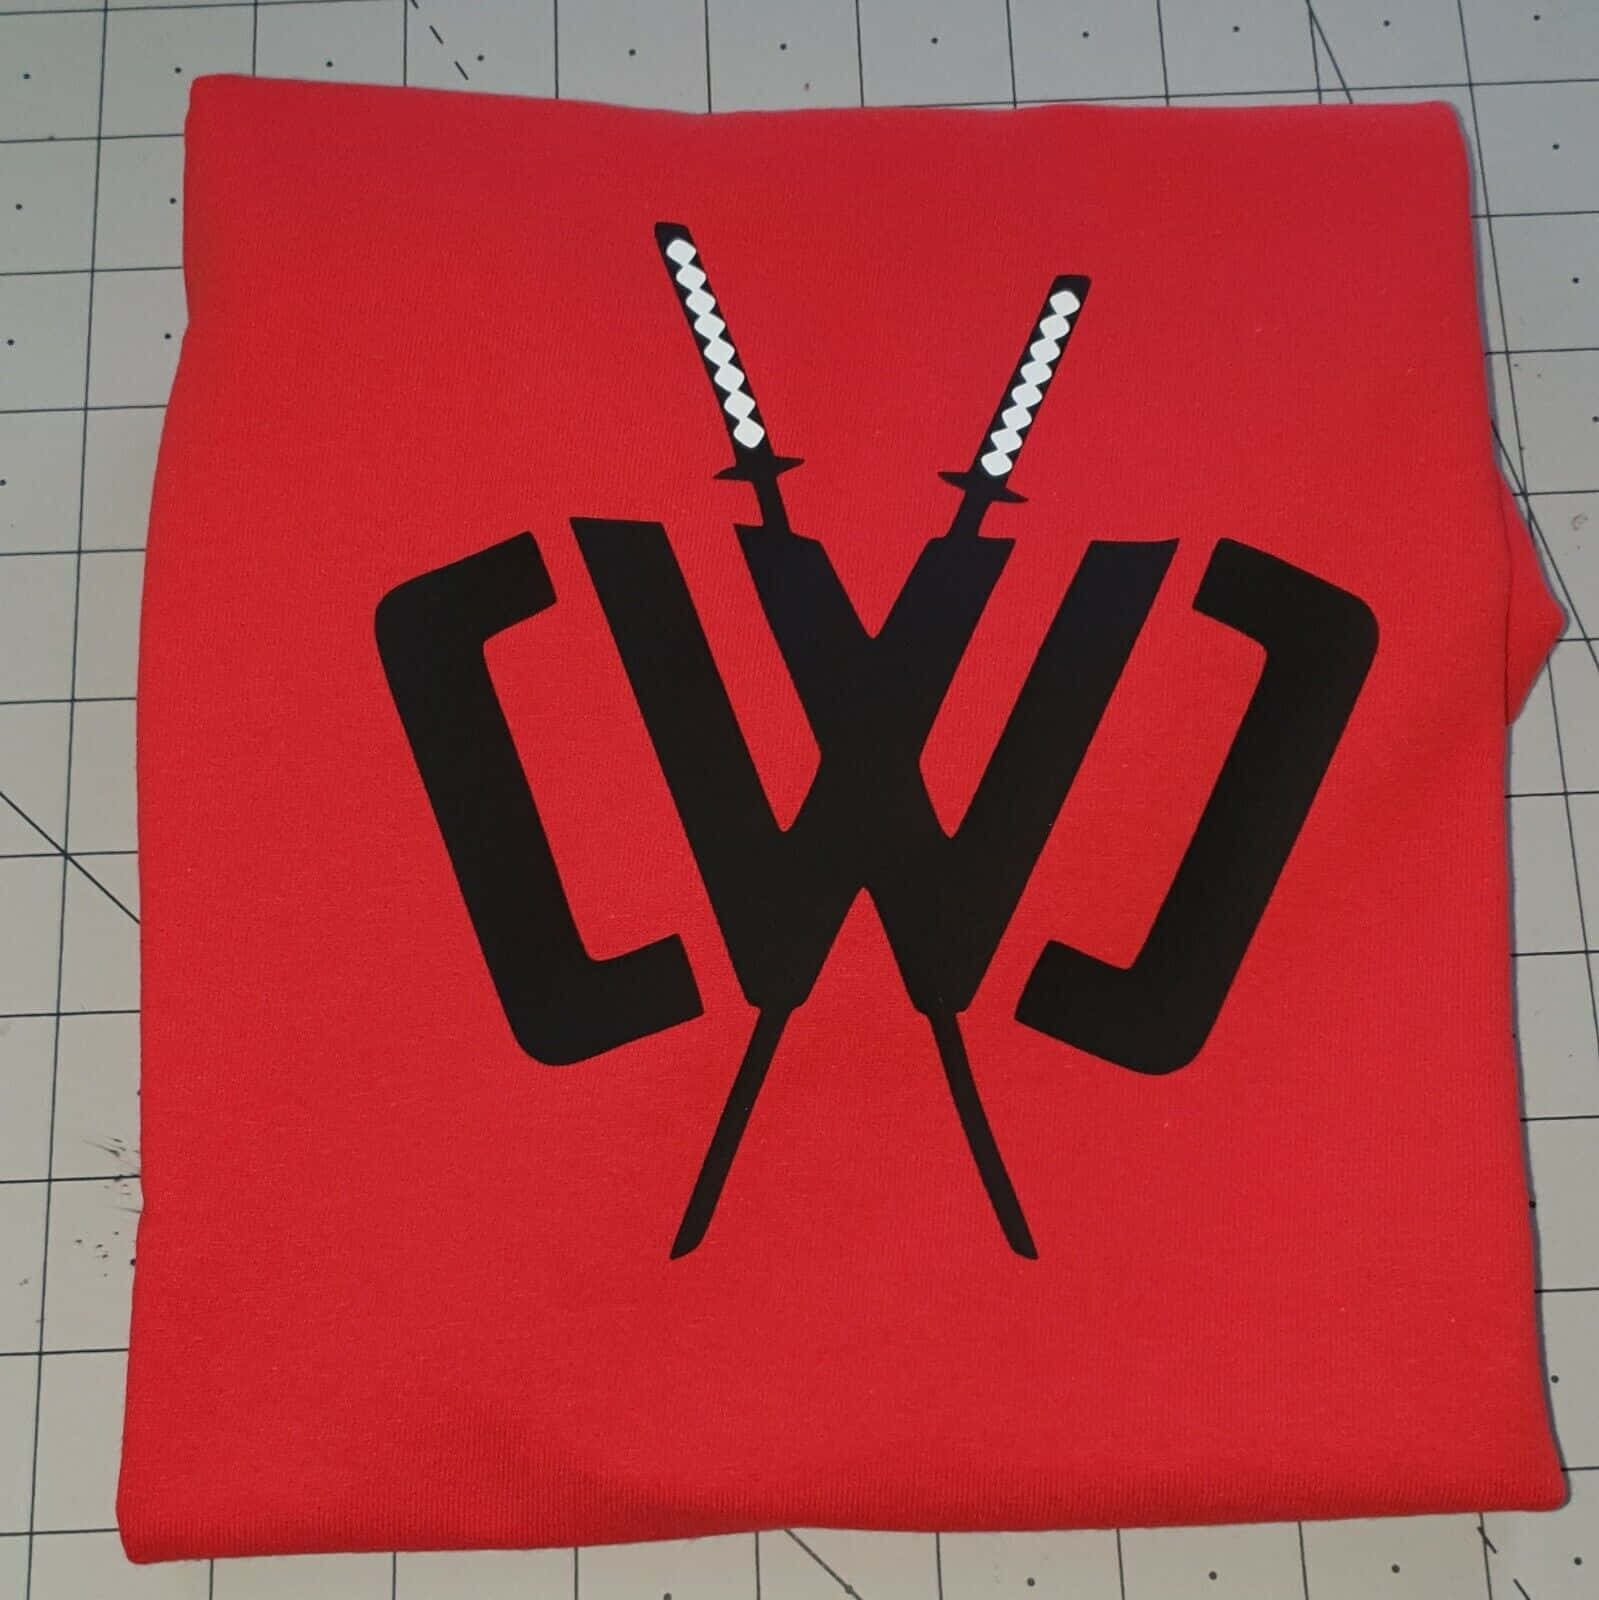 A Red Sweatshirt With Two Swords On It